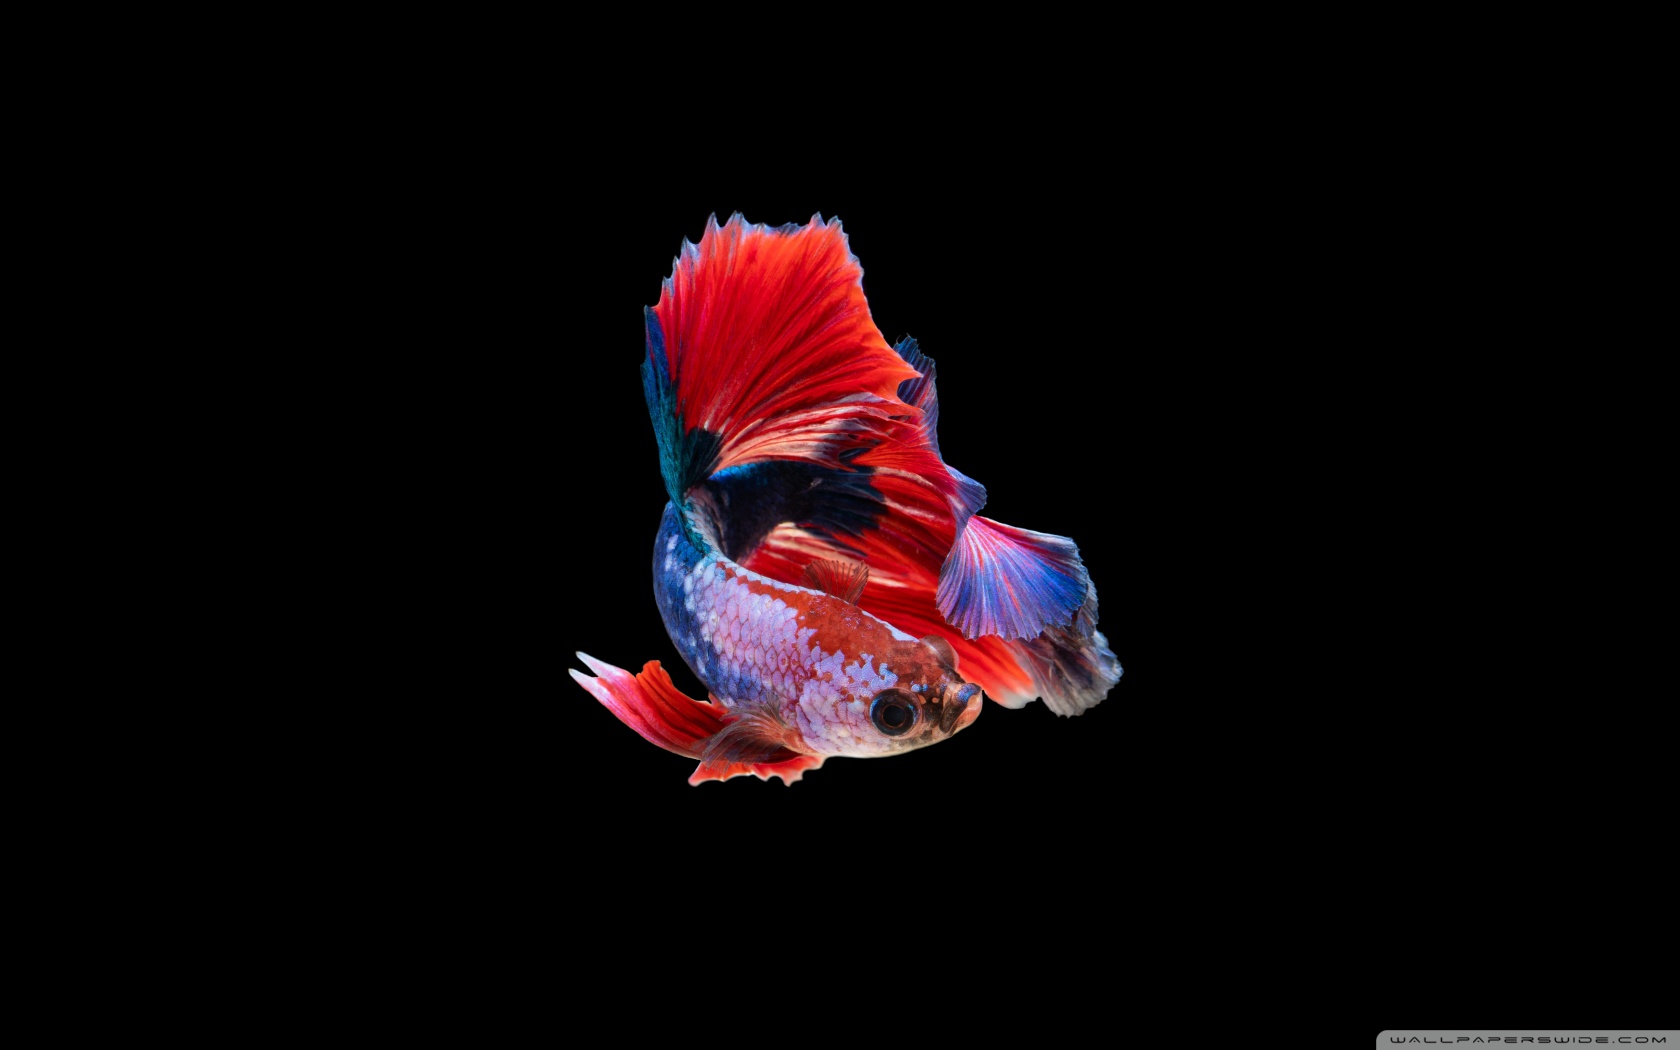 Abstract Fine Art Of Moving Fish Tail Of Betta Fish Or Siamese Fighting Fish  Isolated On Black Background. Stock Photo, Picture and Royalty Free Image.  Image 54804687.